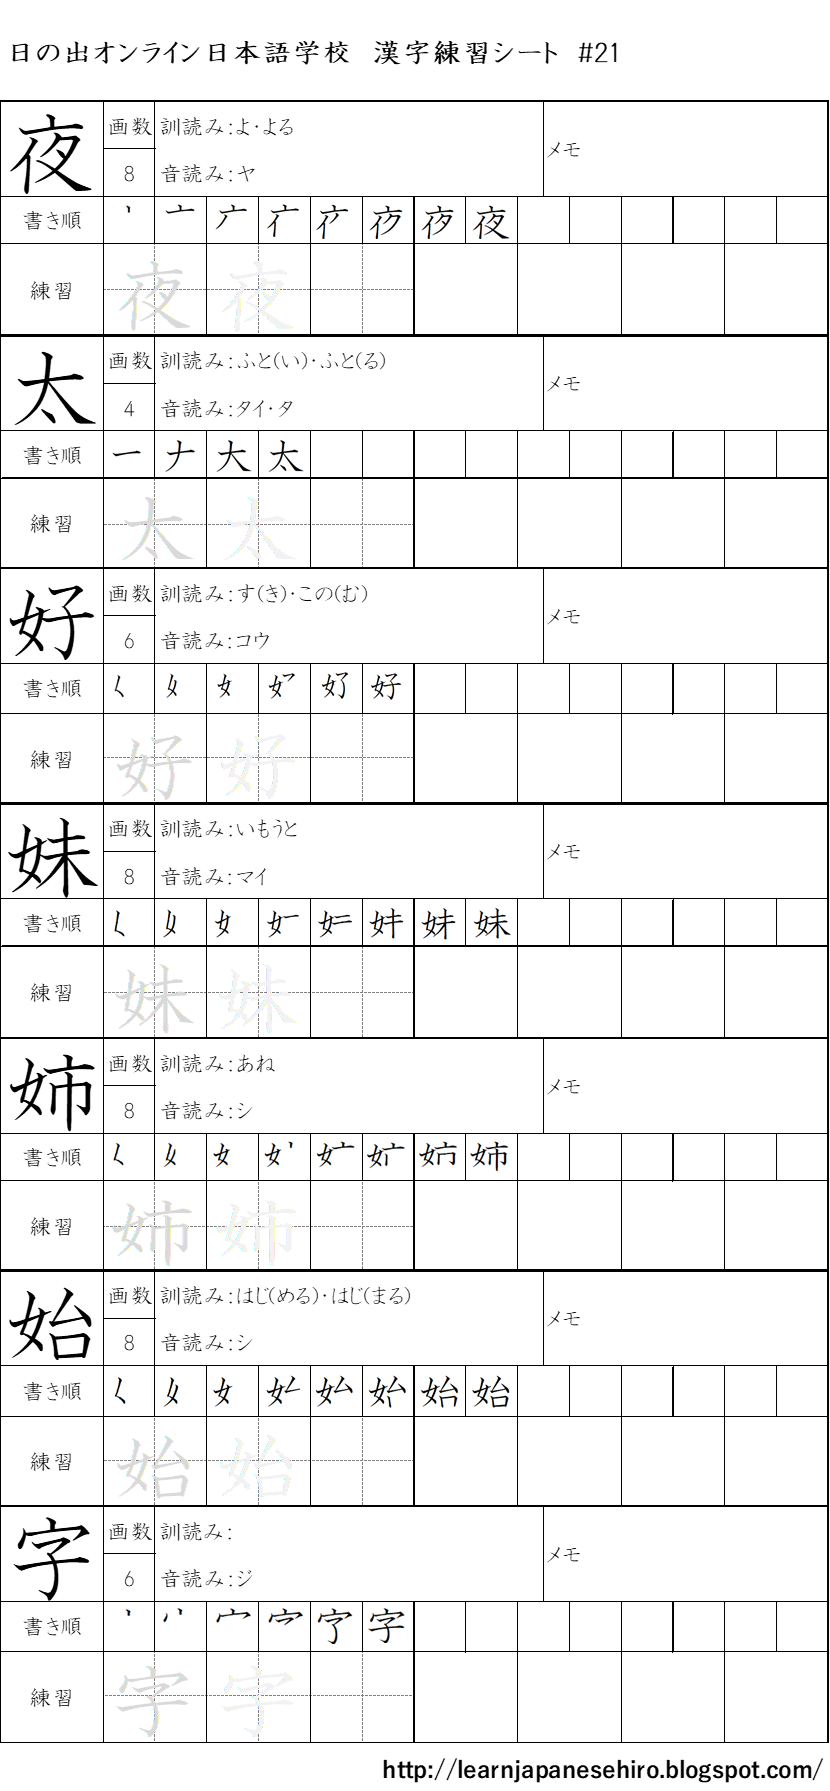 WDLJ Why don't you learn Japanese? (´・ω・): Kanji Practice Sheets Download.